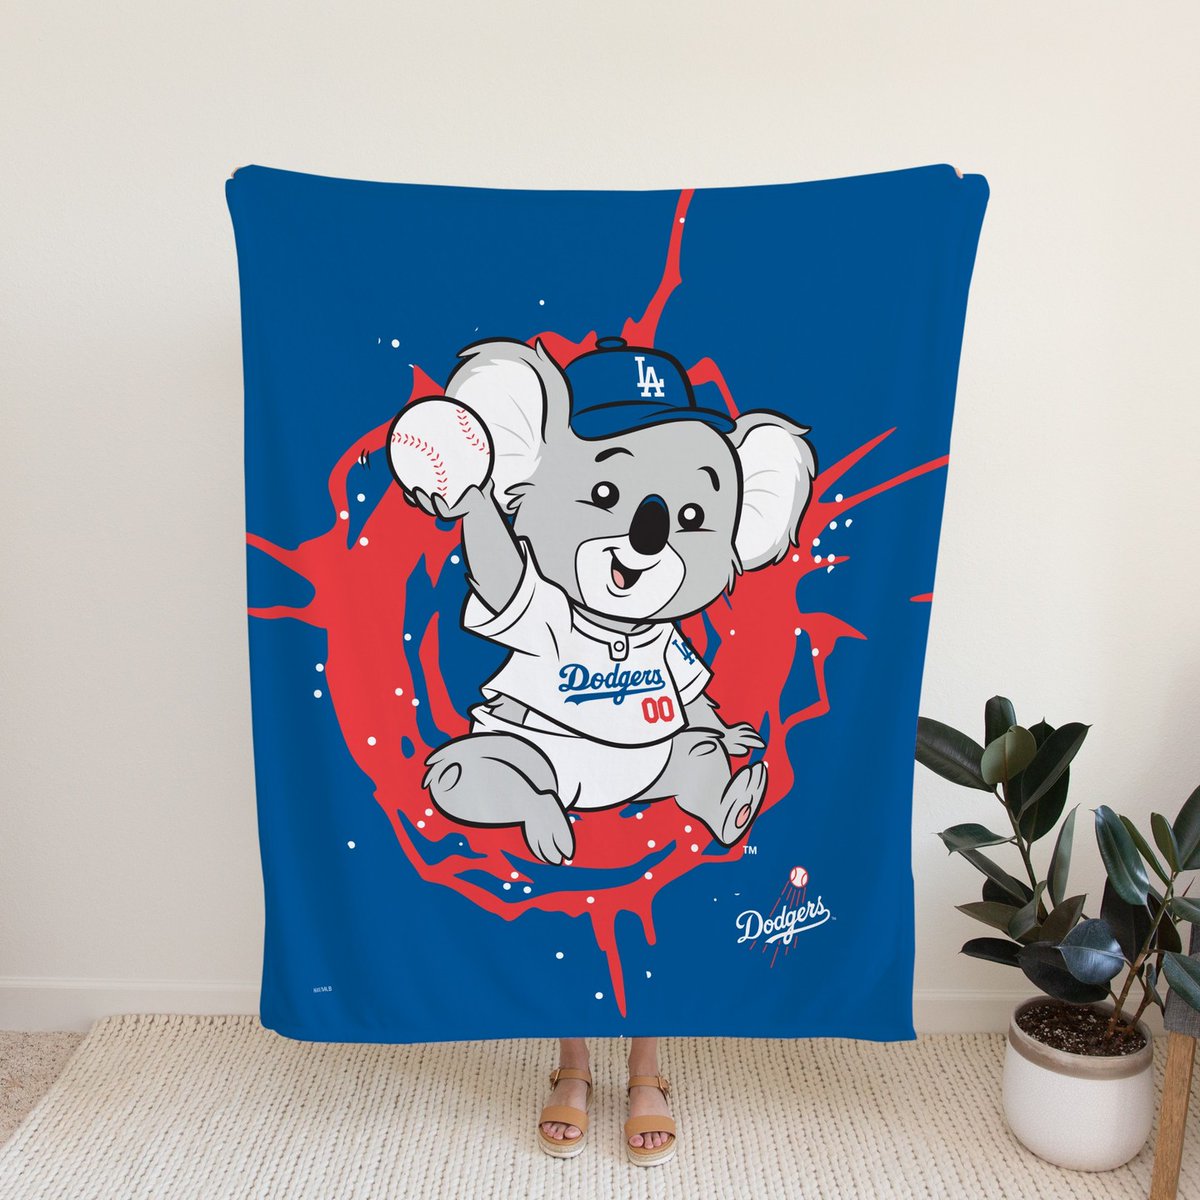 Stoked that @MLB is in full swing would be an understatement. Stay cozy all season long with one of our Mascot Throw Blankets featuring your favorite @MLB team: bit.ly/44jNVuI #MLB | #Dodgers | #Northwest